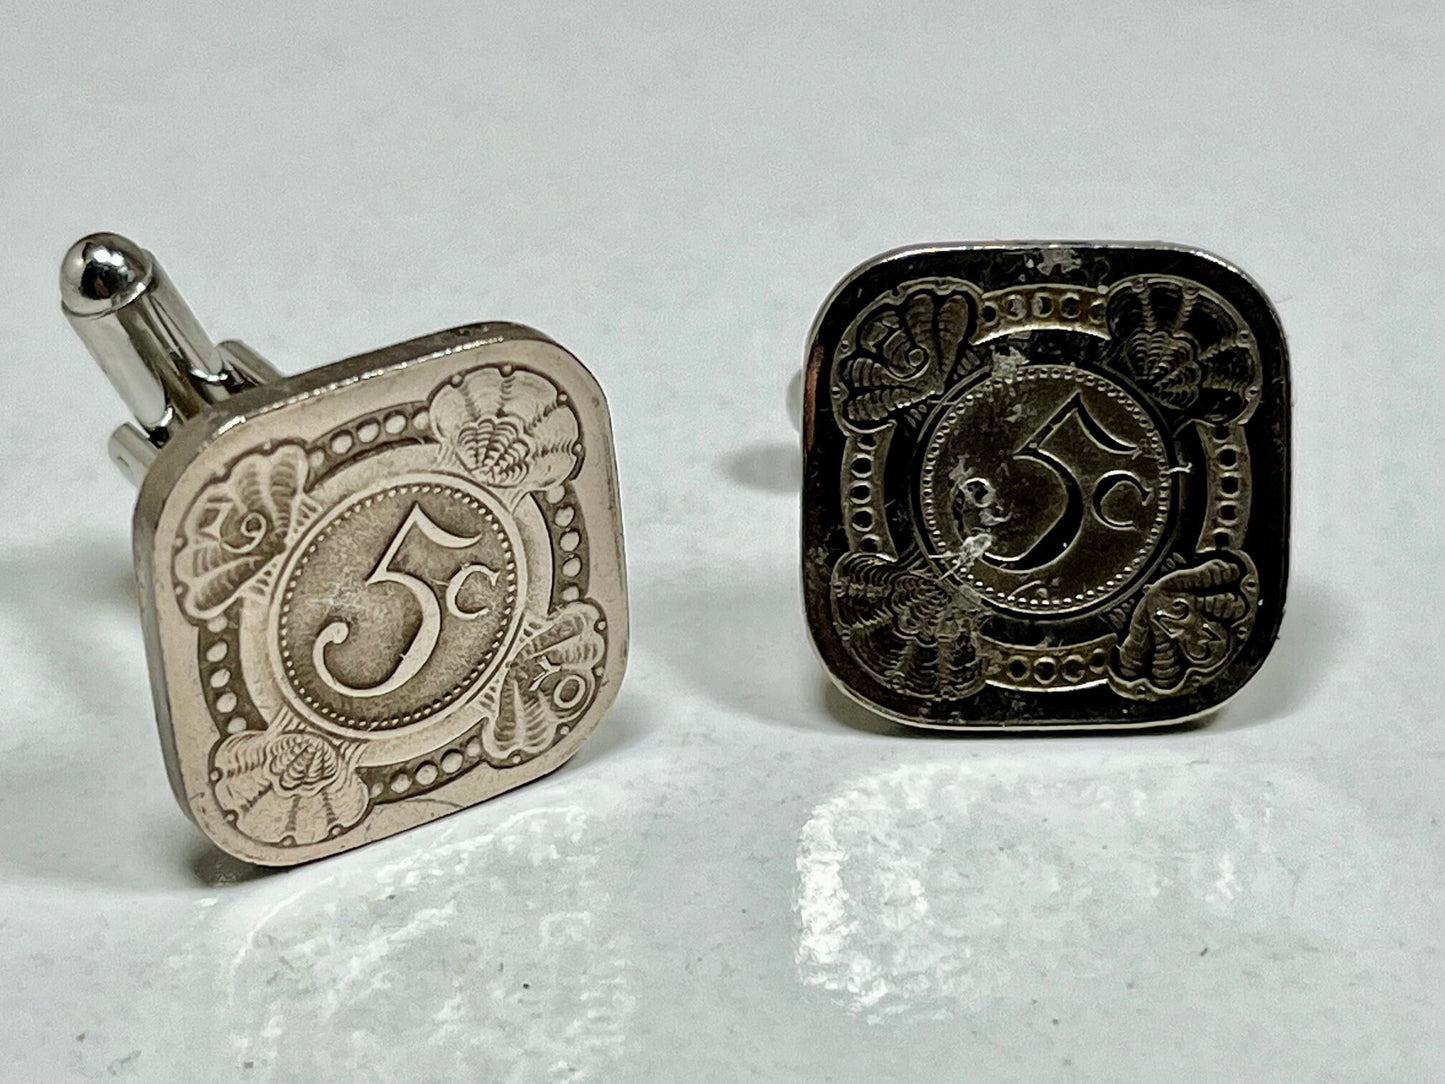 Netherlands Coin Cufflinks, Cuff Links, 5 Cents Vintage Custom Made Rare Coins Coin Enthusiast Fashion Accessory Handmade